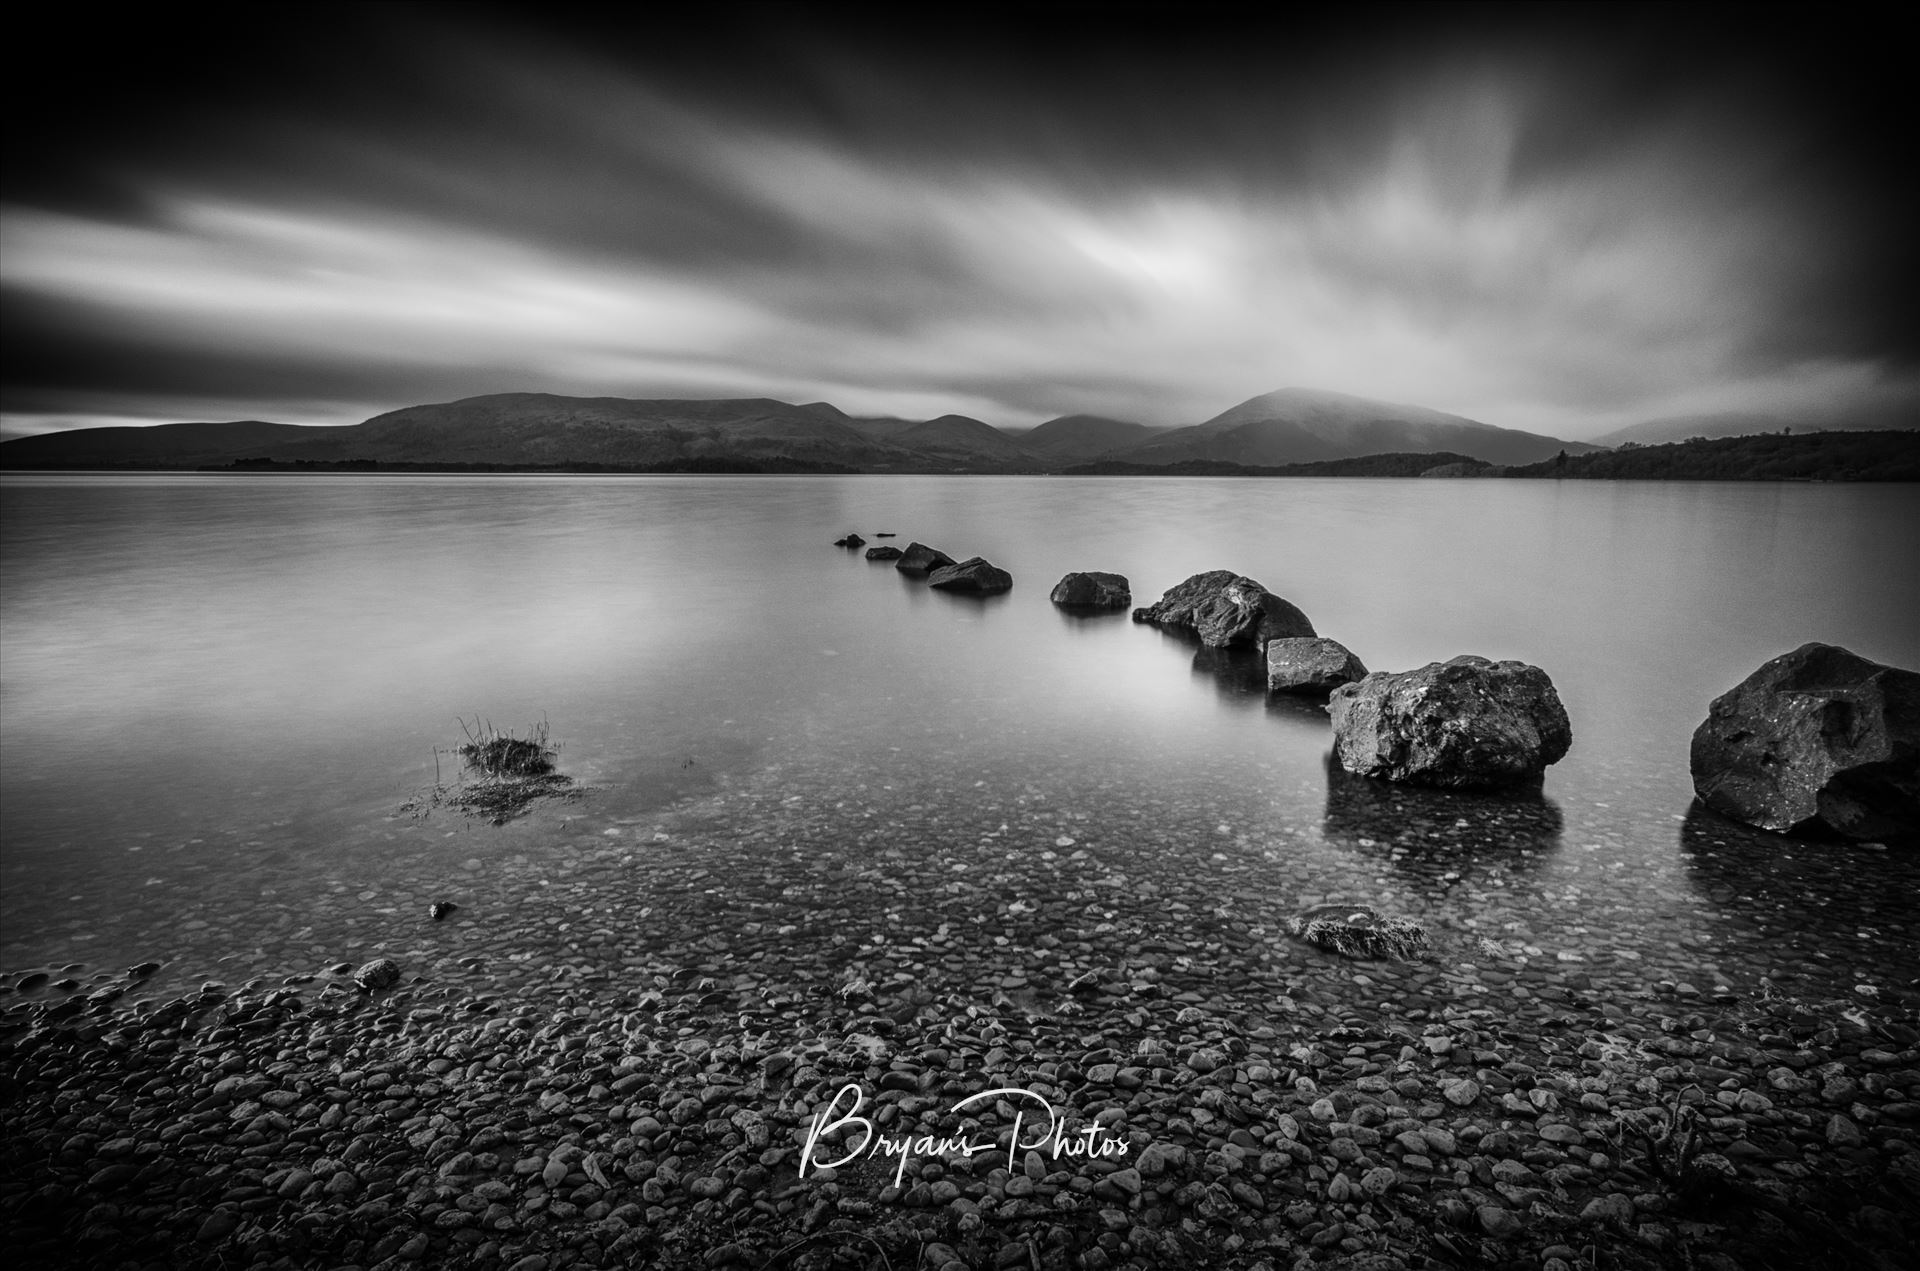 Moody Milarrochy A black & white photograph of Loch Lomond taken from Milarrochy Bay on the eastern shore of the loch near Balmaha. by Bryans Photos